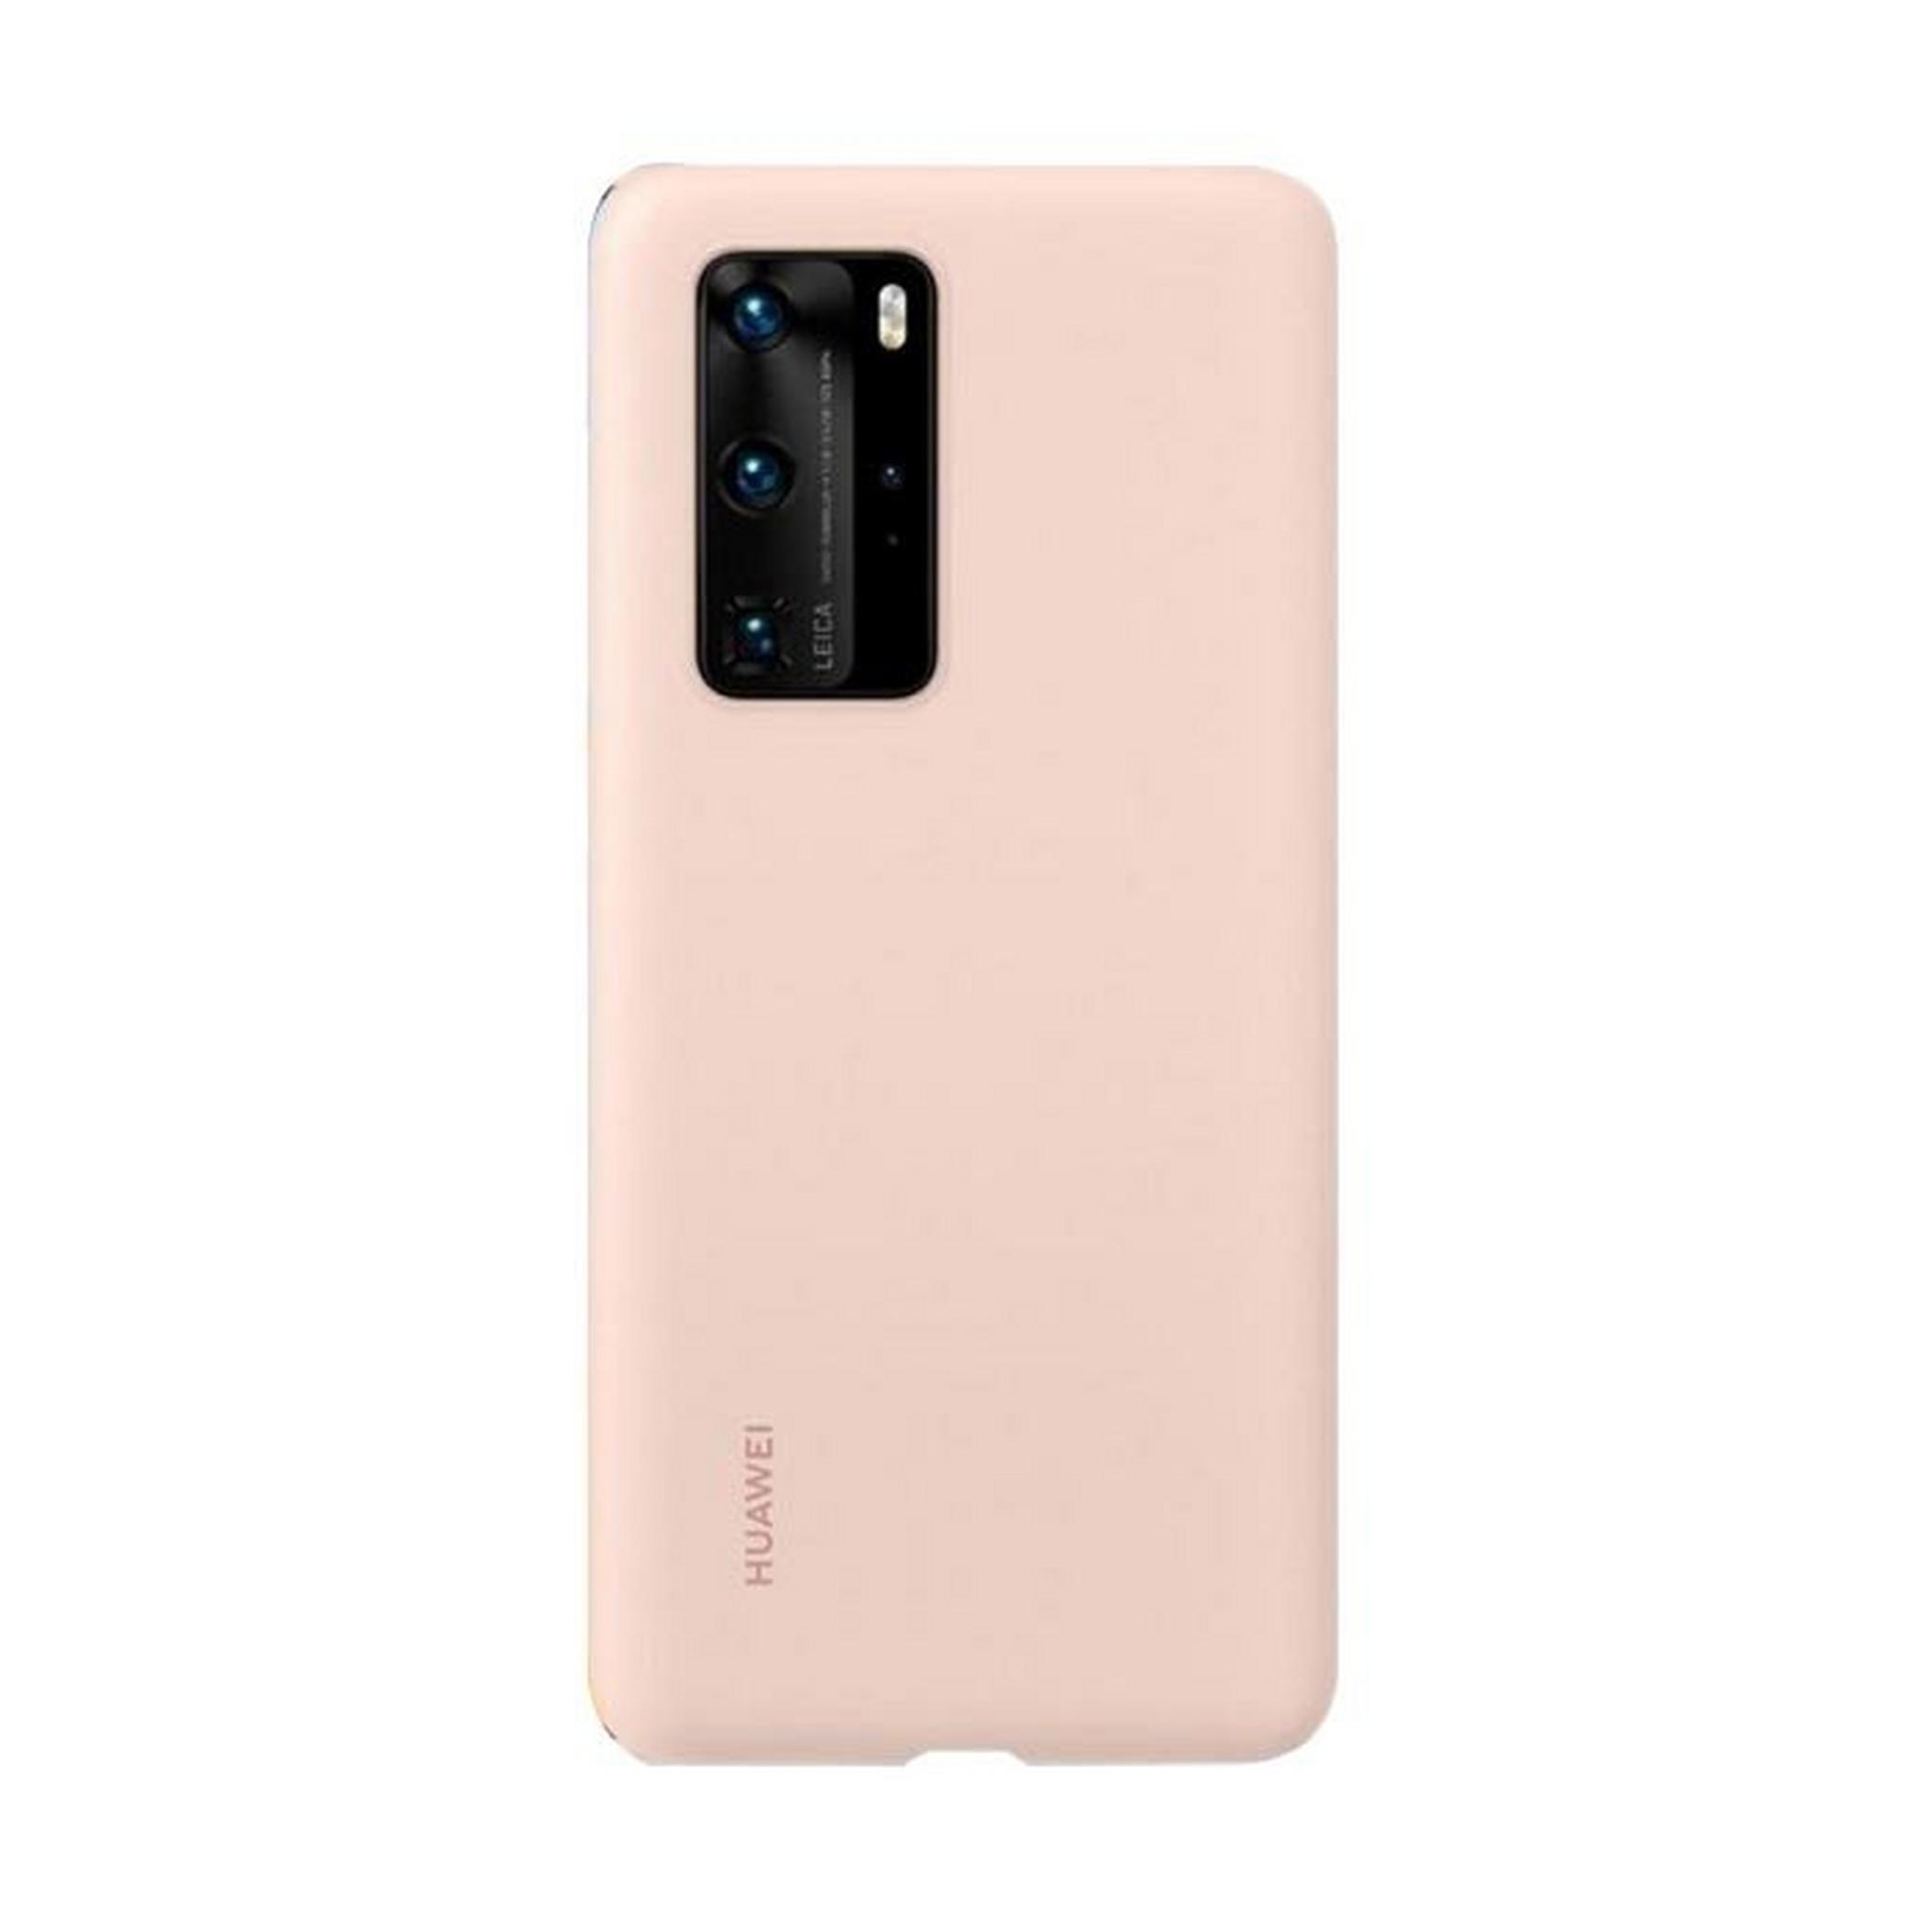 Huawei P40 Pro Silicone Back Case (51993807) - Pink